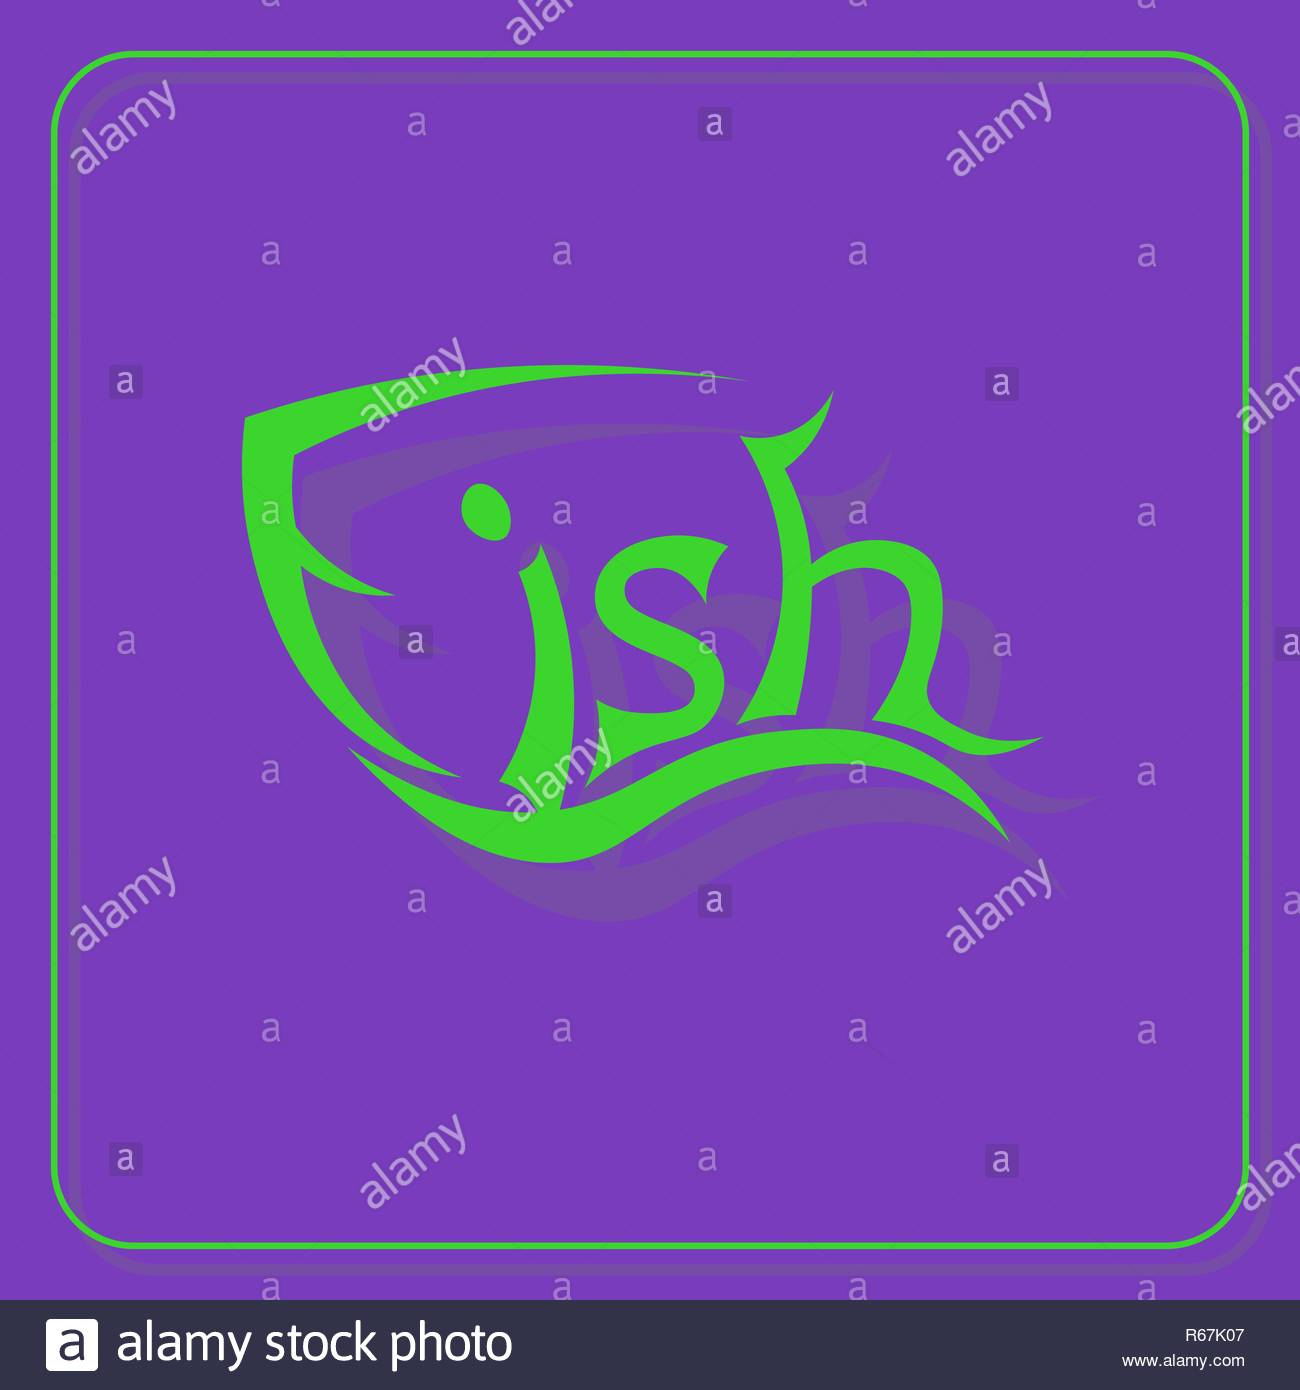 Art Icon For Cafe Fast Food From Contours On Uv Background